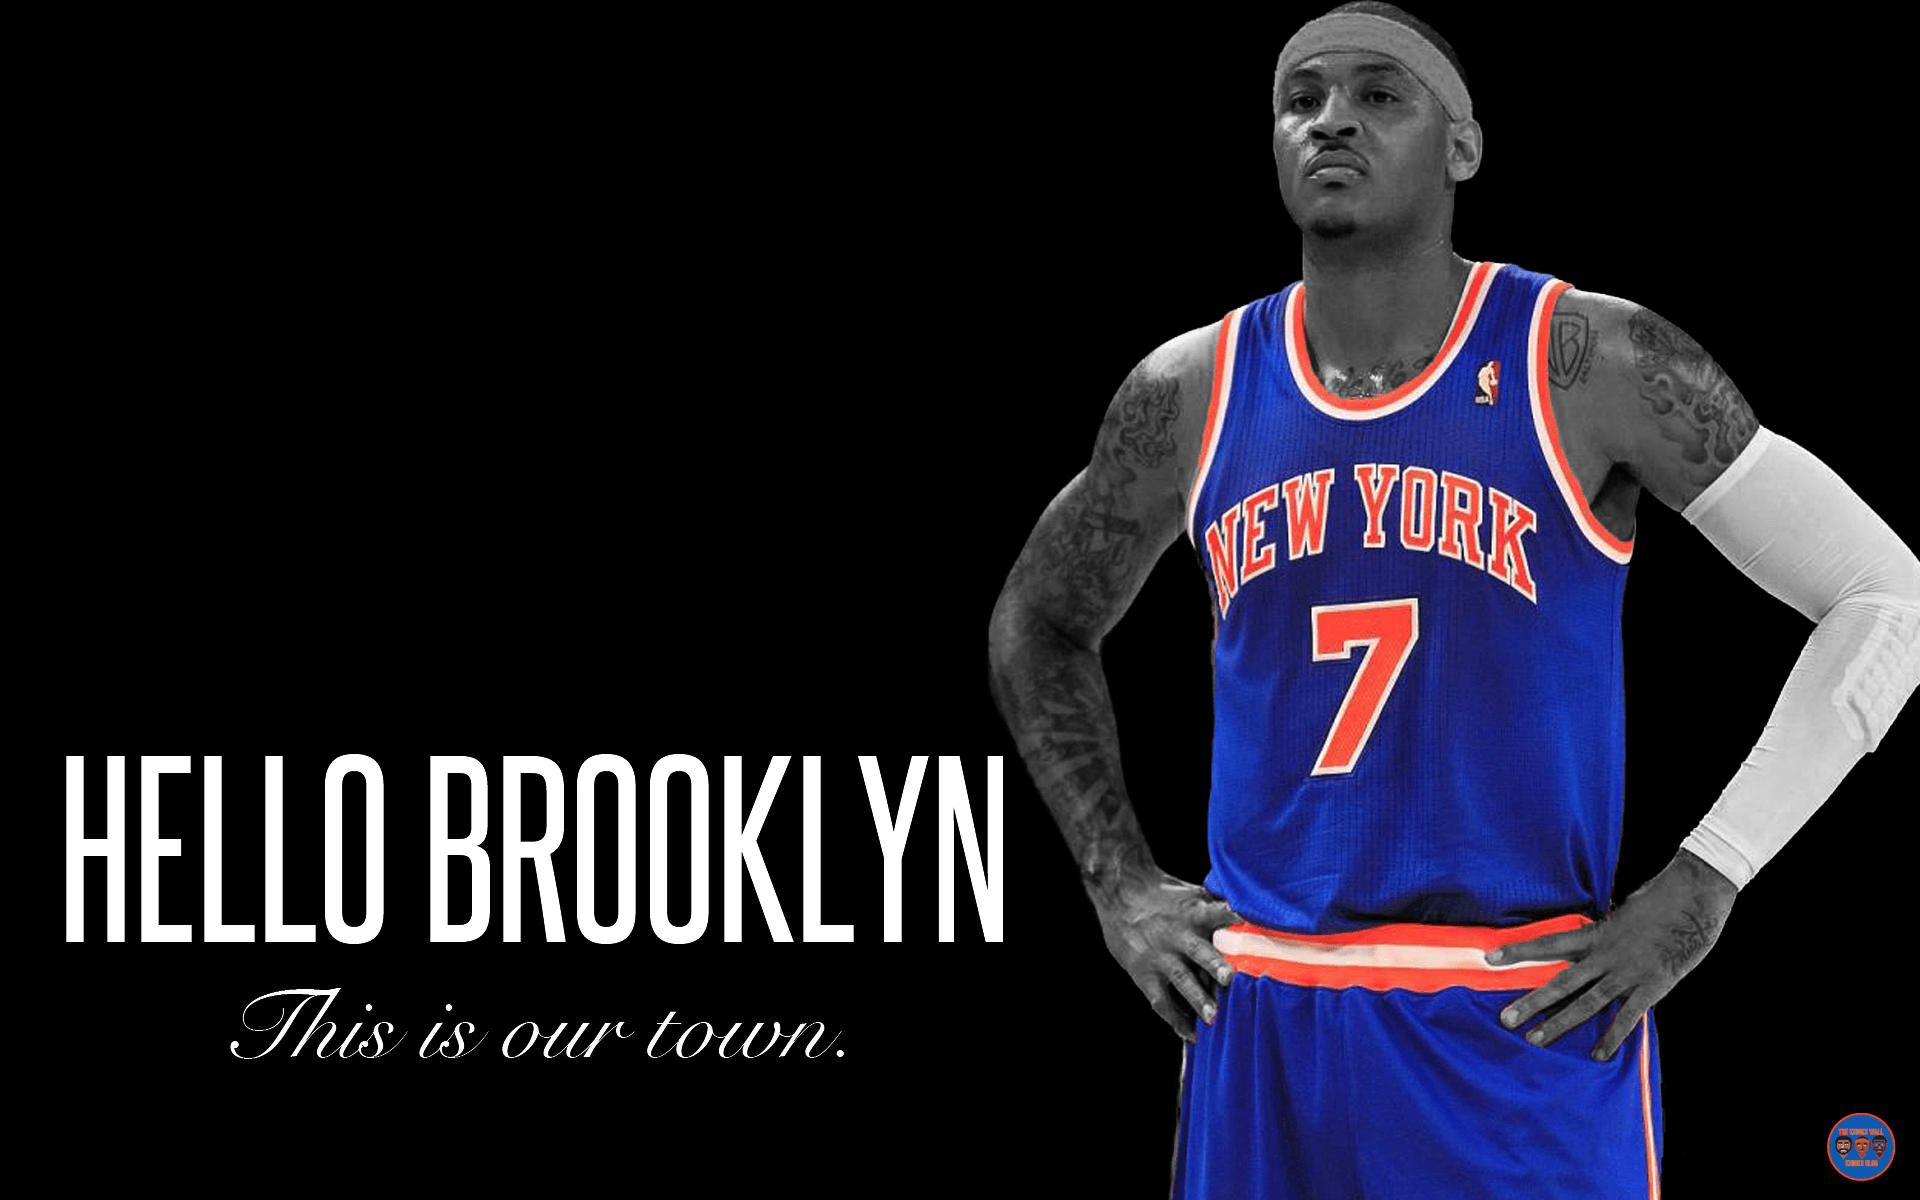 Nyk Basketball Wallpaper Related Keywords & Suggestions